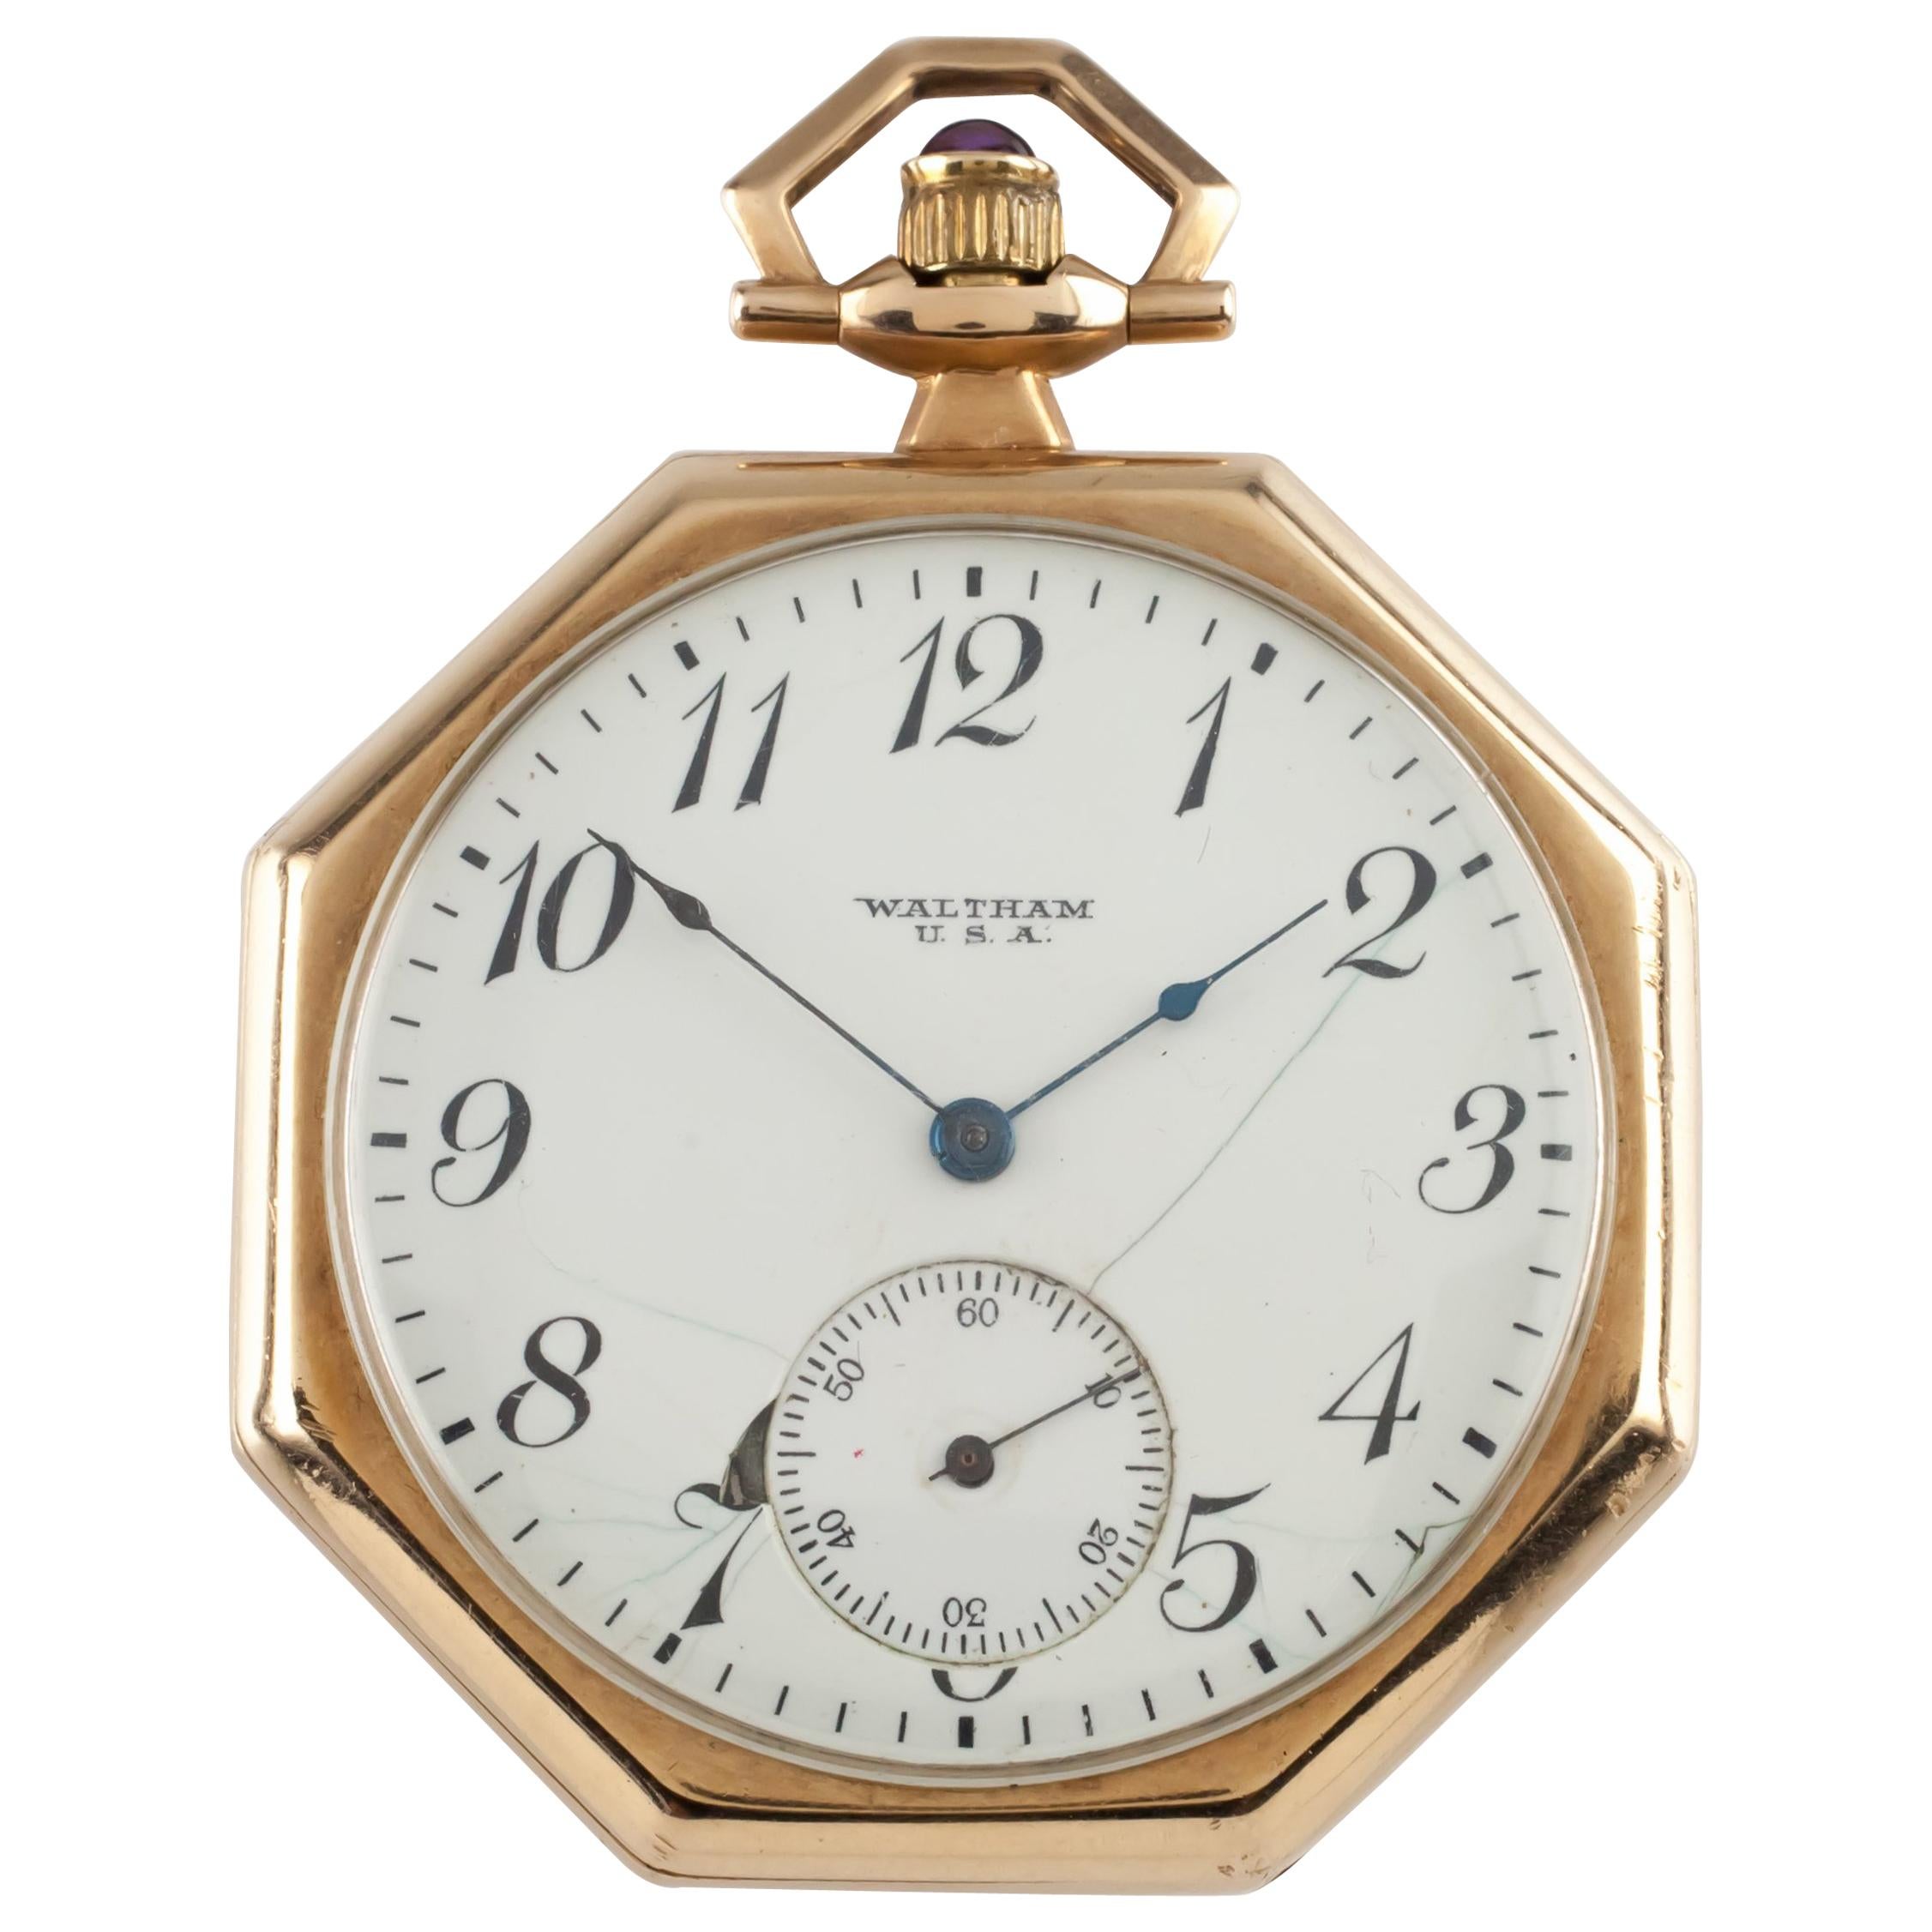 How do I know if my Waltham pocket watch is real gold?